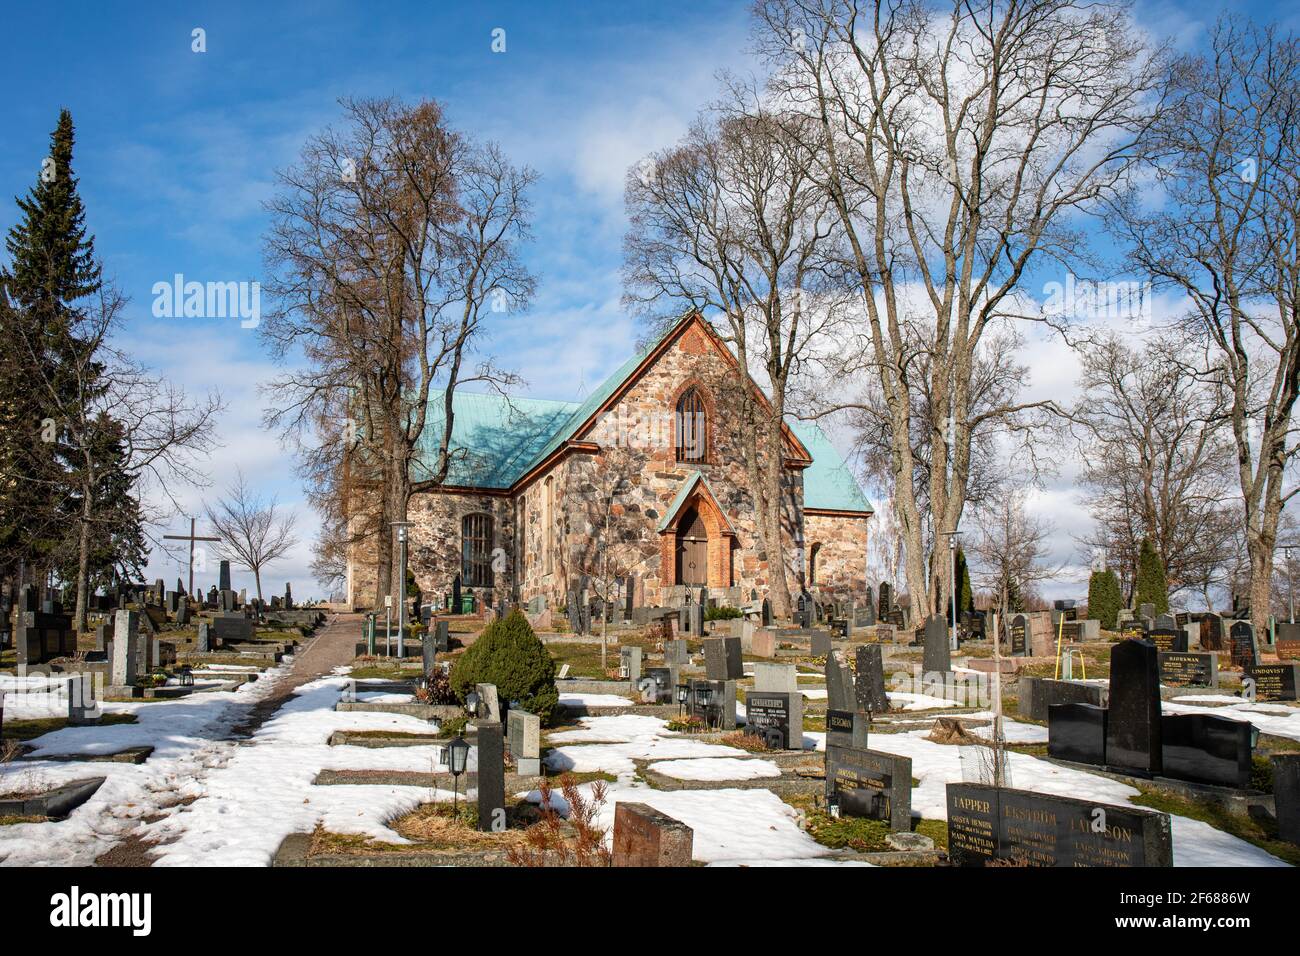 Medieval St. Michael's gray stone church and churchyard with gravestones in Kirkkonummi, Finland Stock Photo